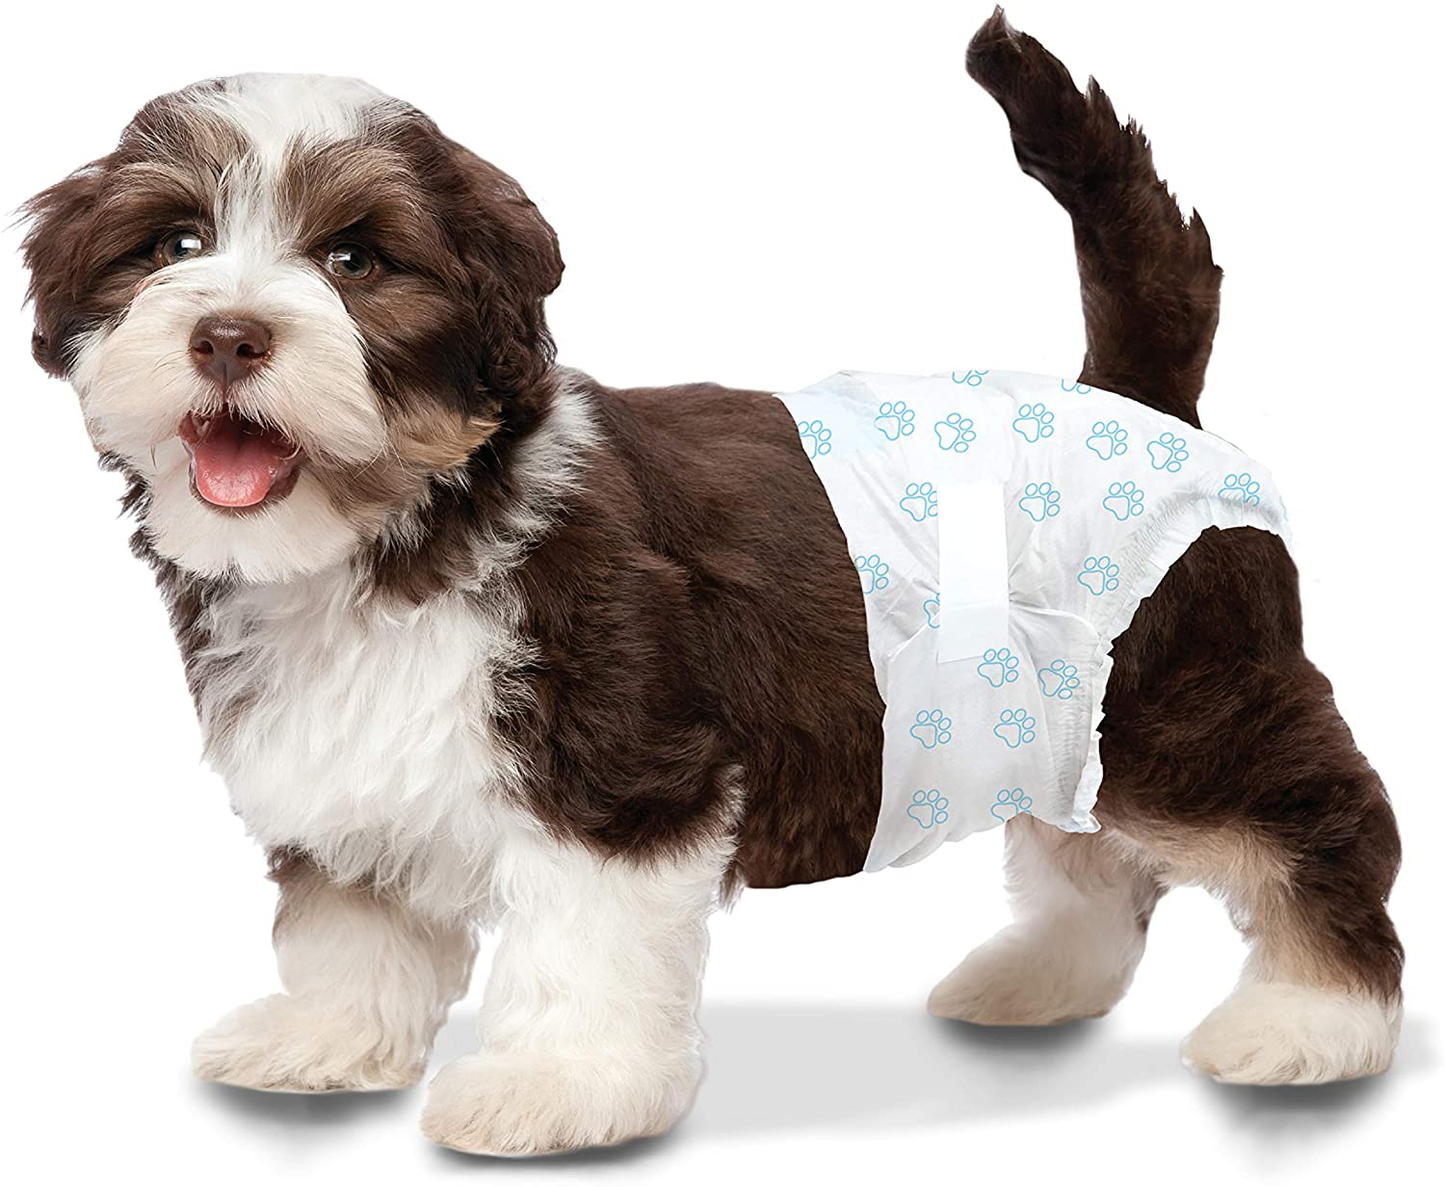 Wee-Wee Disposable Dog Diapers, X-Small (36 Count), White Animals & Pet Supplies > Pet Supplies > Dog Supplies > Dog Diaper Pads & Liners Four Paws   